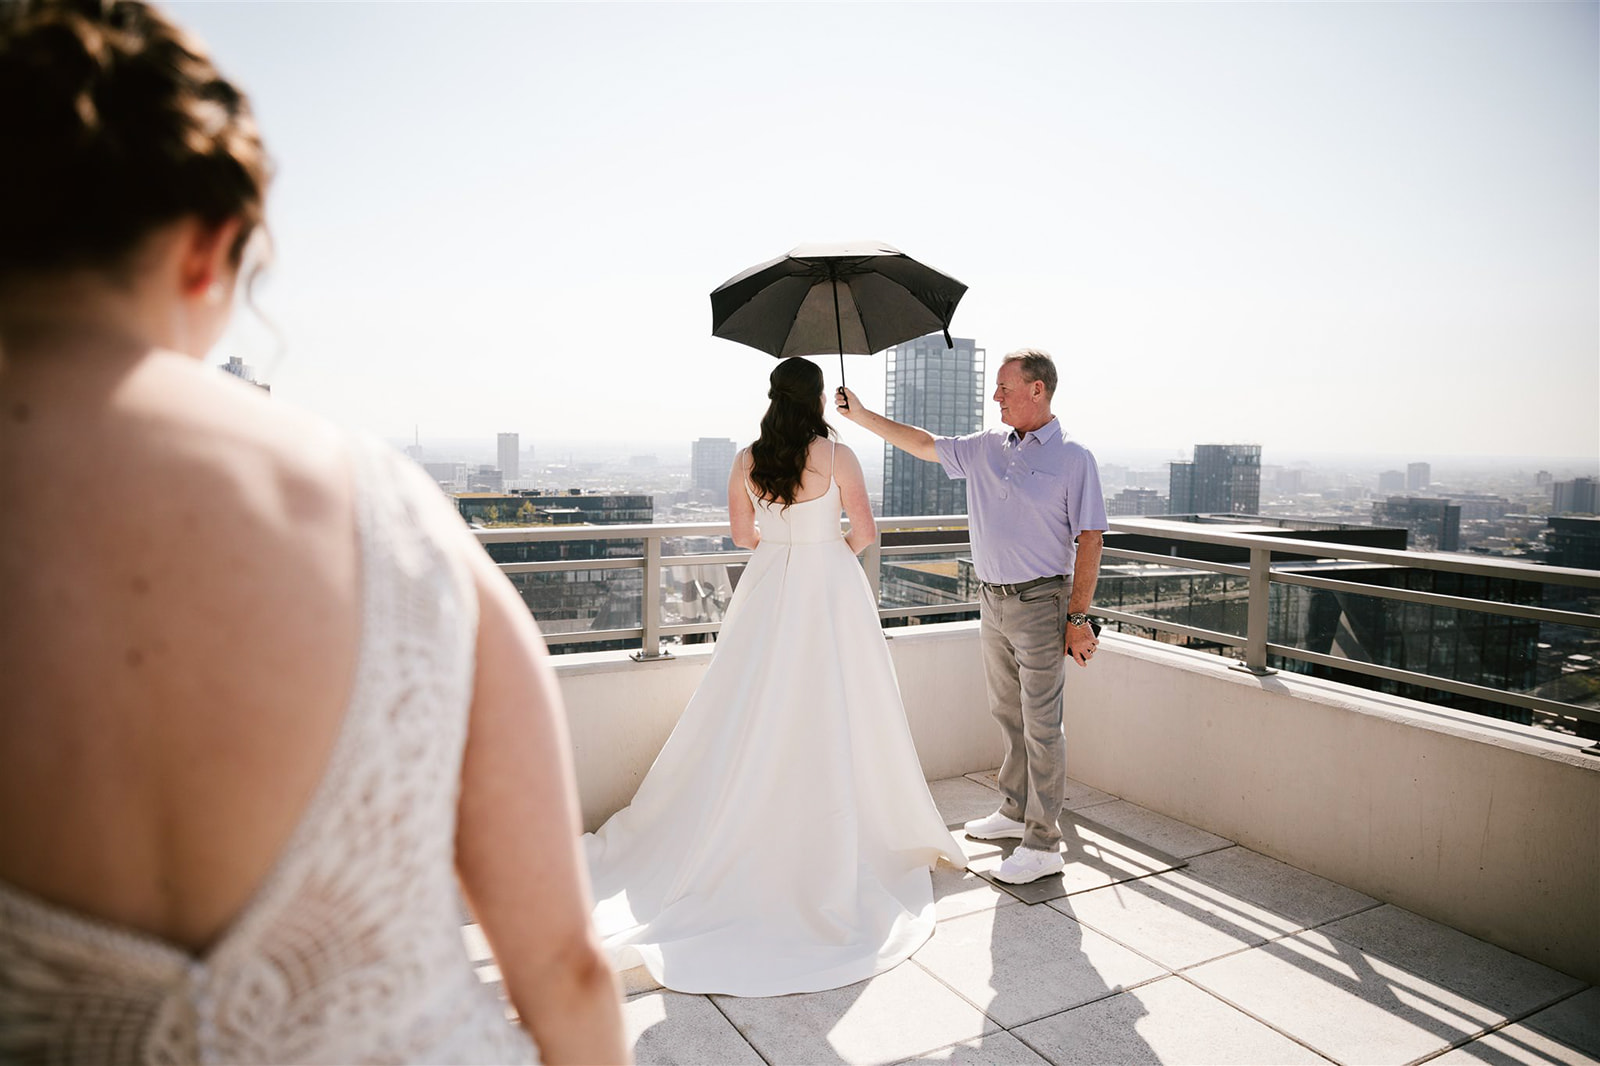 Two brides share a first look on rooftop with Chicago skyline, one bride's father holds an umbrella.